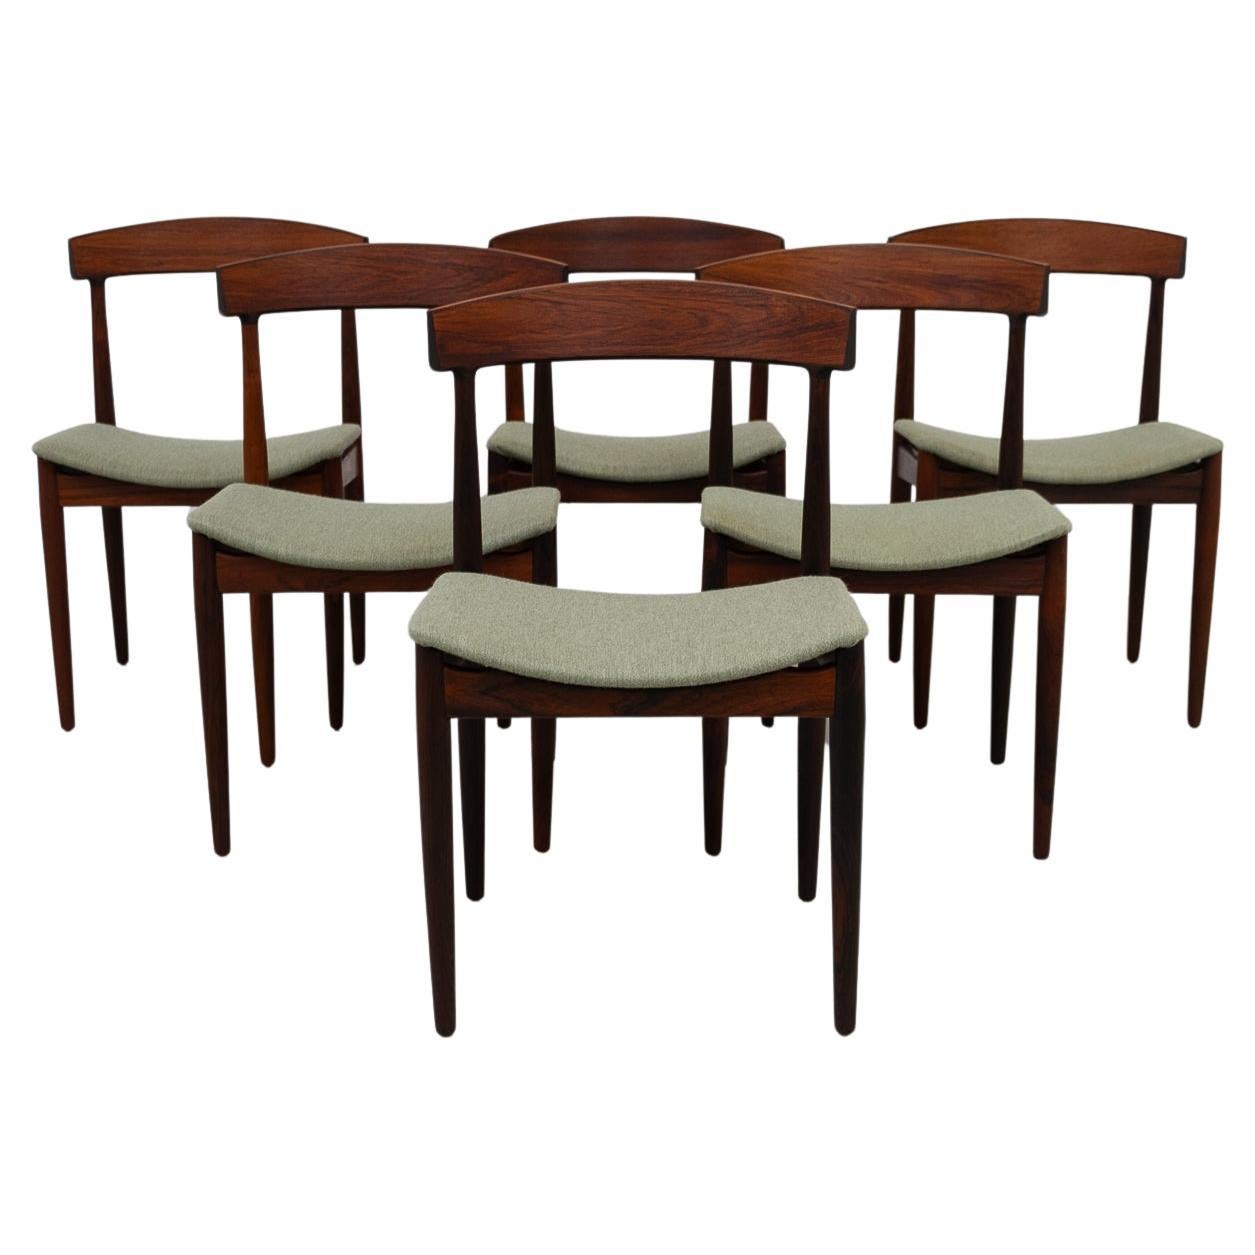 Danish Modern Rosewood Dining Chairs by Johannes Andersen, 1960s. Set of 6.